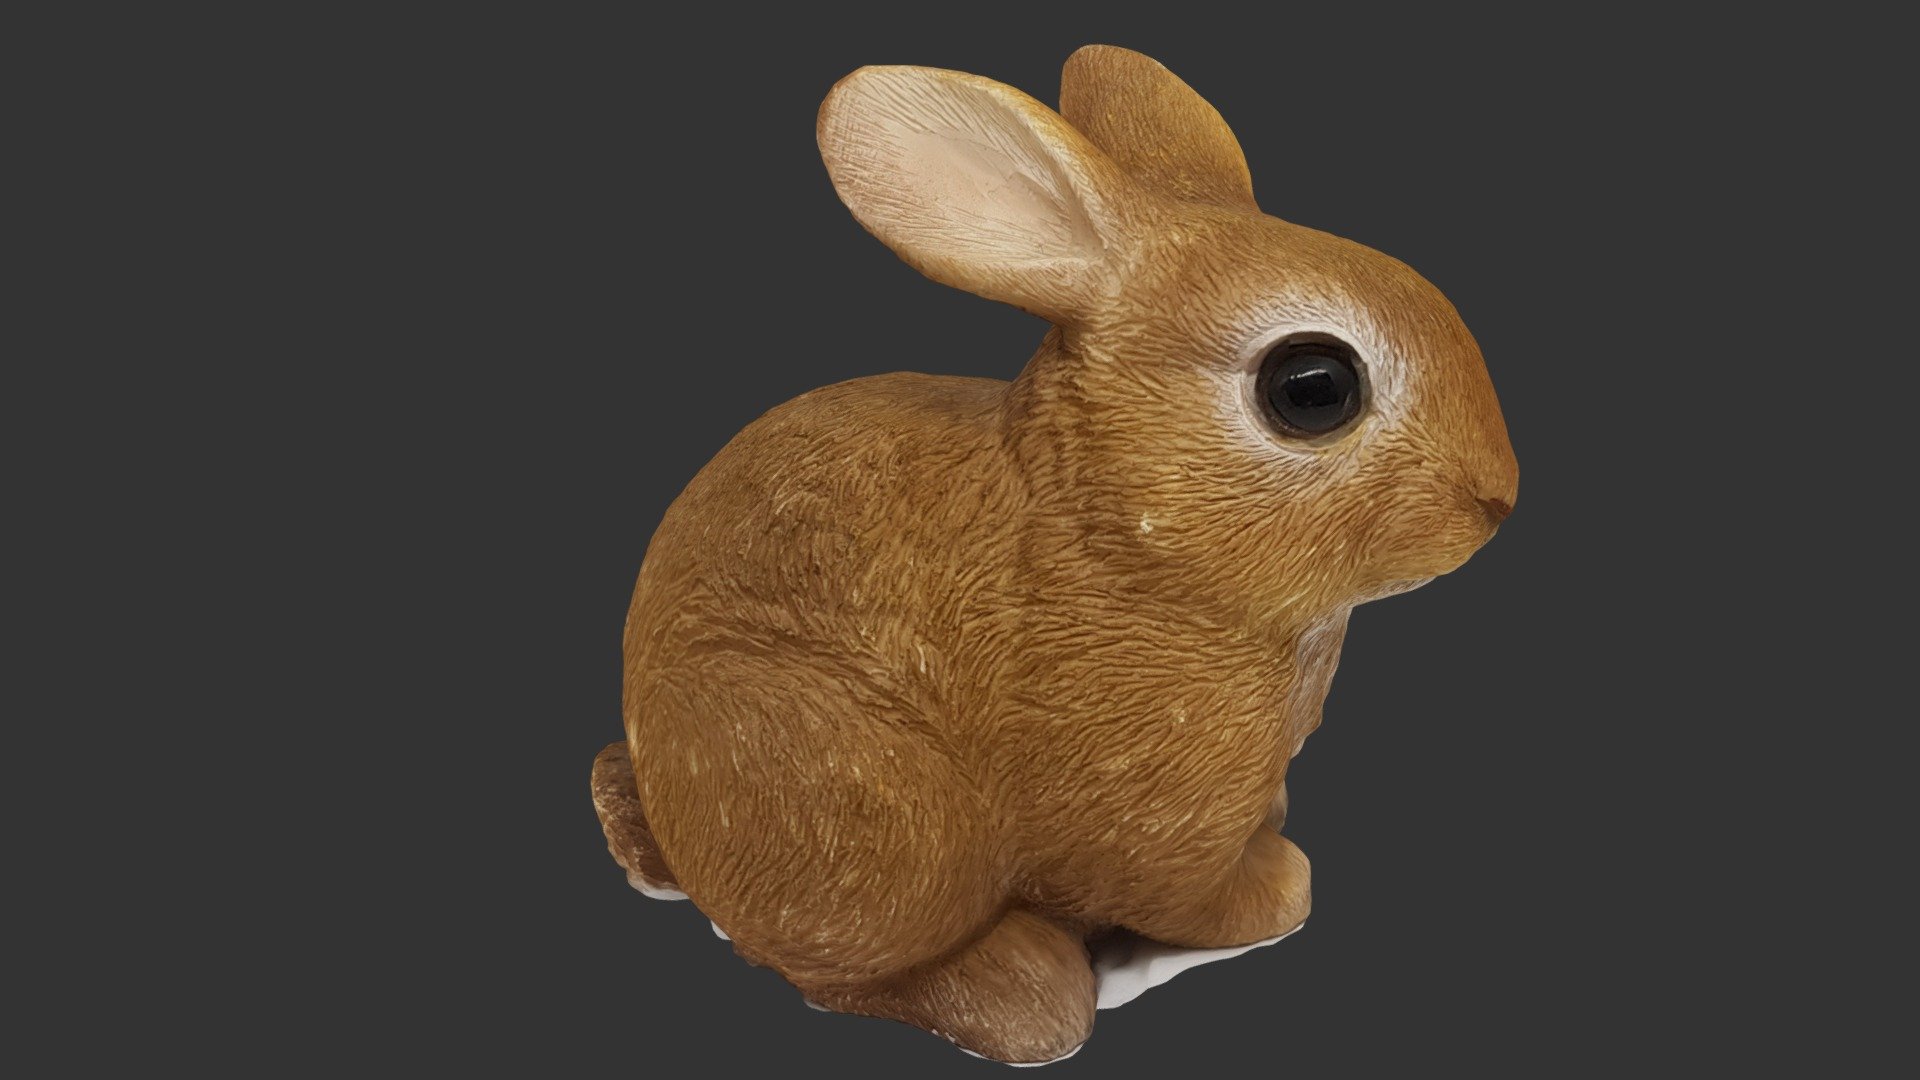 Here is a rustic, ceramic, brown Netherland Dwarf Rabbit 3D model. This was created using Agisoft Photoscan. Its dimensions are 11cm x 7cm x 10.5cm. Photos were taken using a Samsung S8 phone, which has a F1.7 aperture and Pixel size of 1.22-1.4µm. This model was created for ES2802 university class module called GIS and the Earth Systems, a module conducted by the Asian School of Environment at Nanyang Technology University 3d model